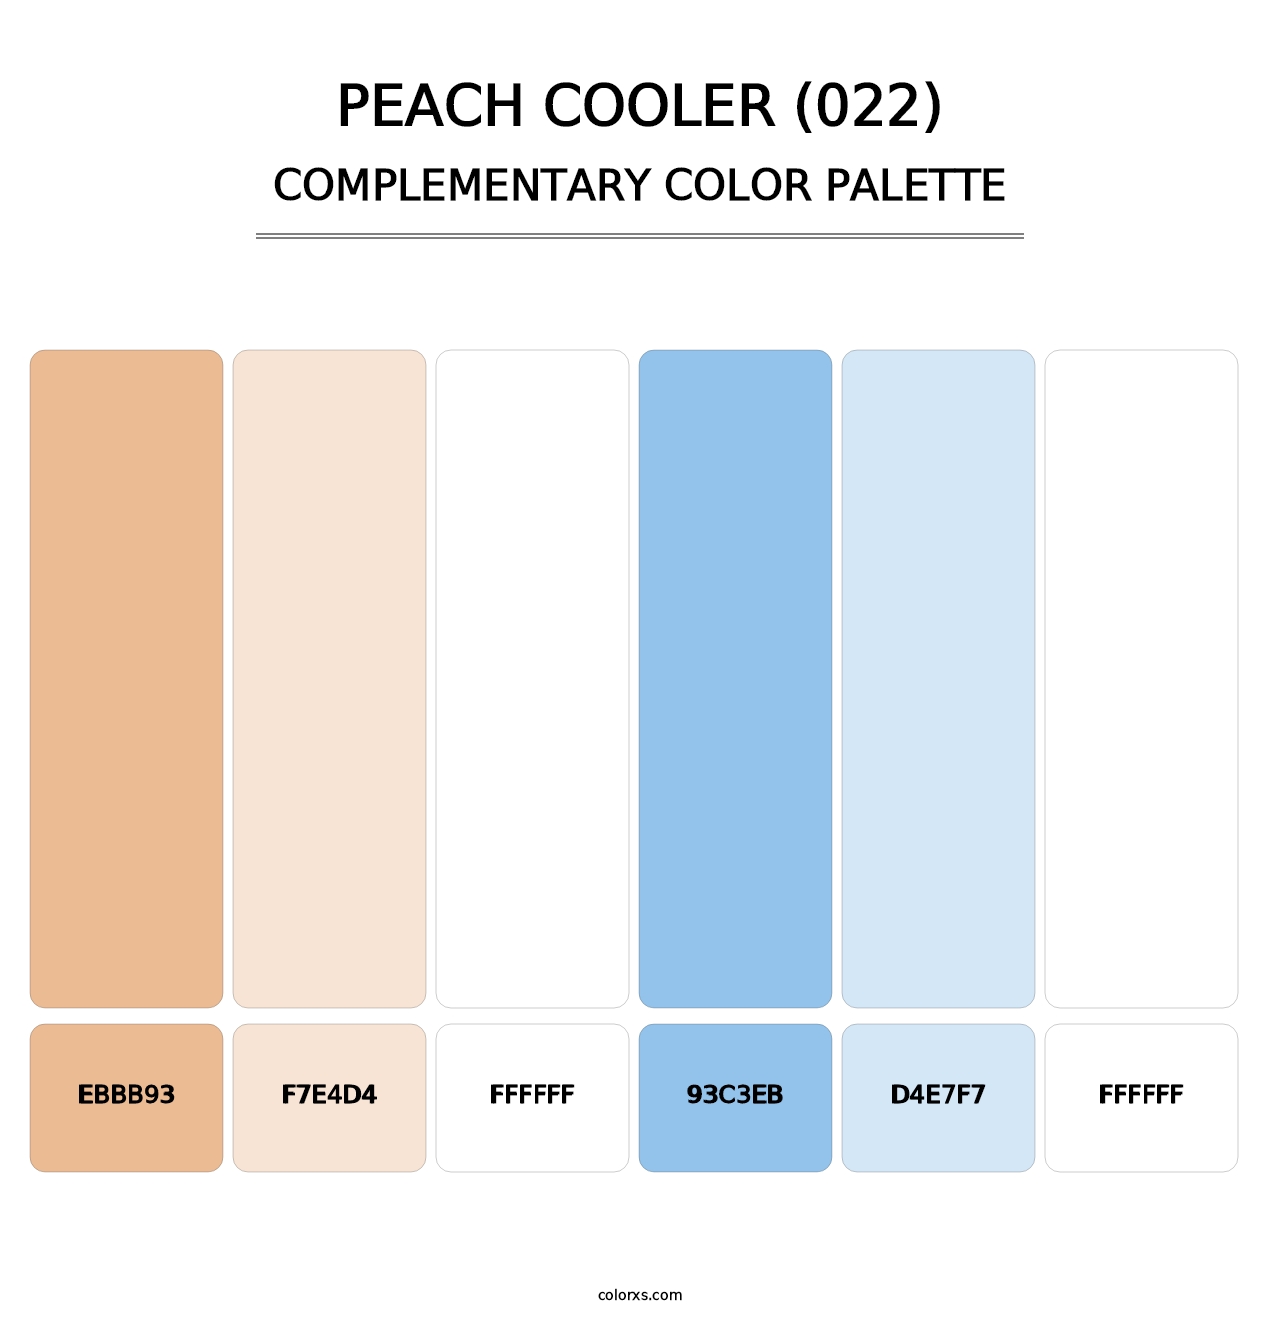 Peach Cooler (022) - Complementary Color Palette